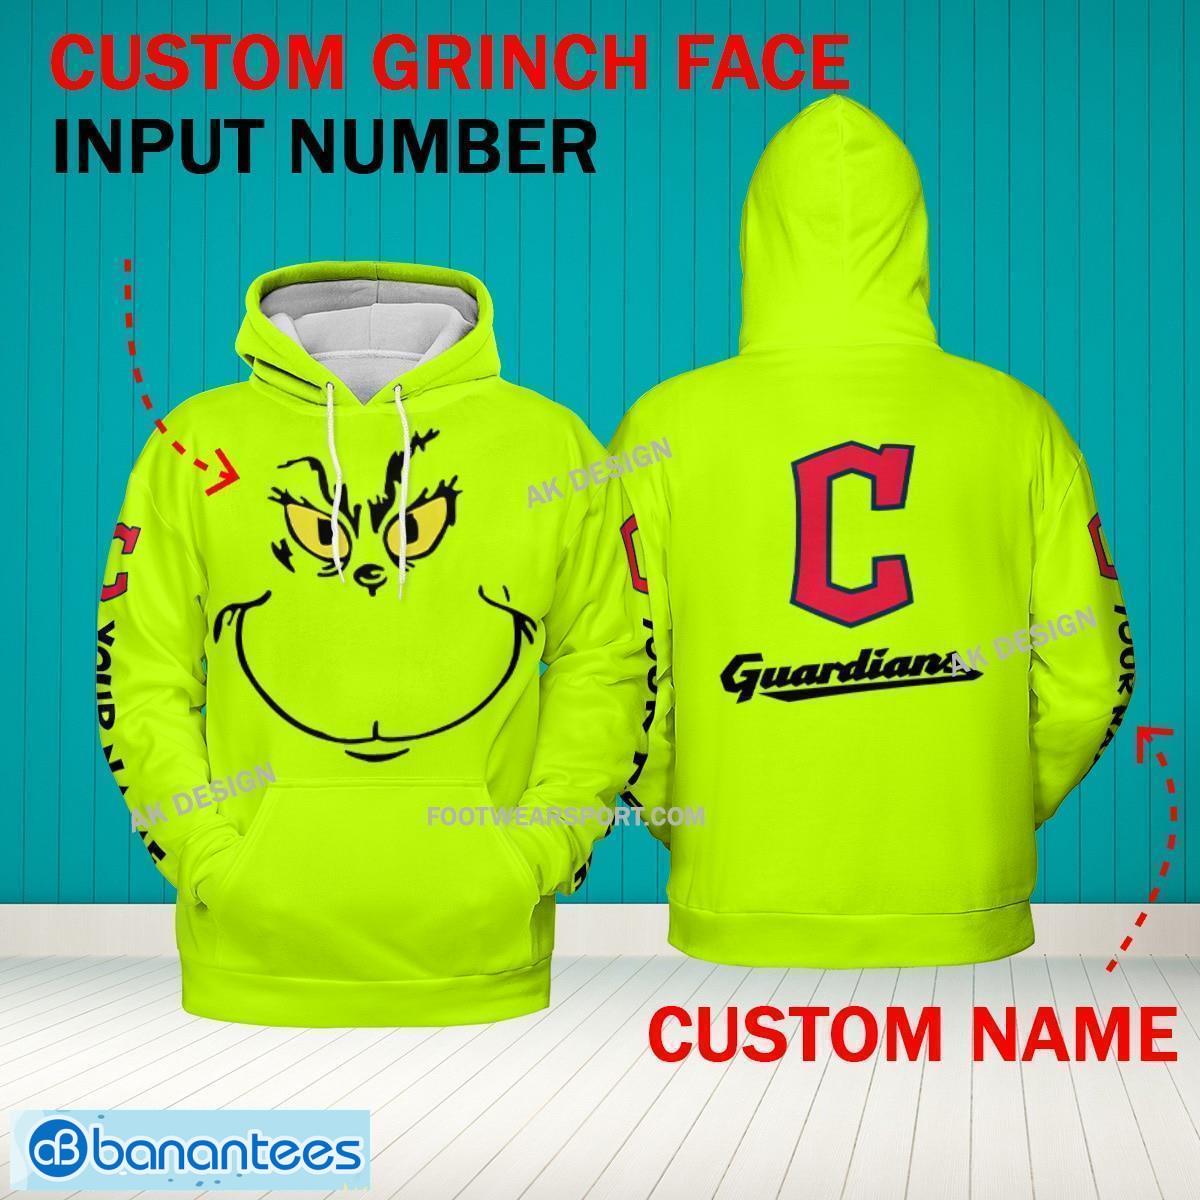 Grinch Face Cleveland Guardians 3D Hoodie, Zip Hoodie, Sweater Green AOP Custom Number And Name - Grinch Face MLB Cleveland Guardians 3D Hoodie